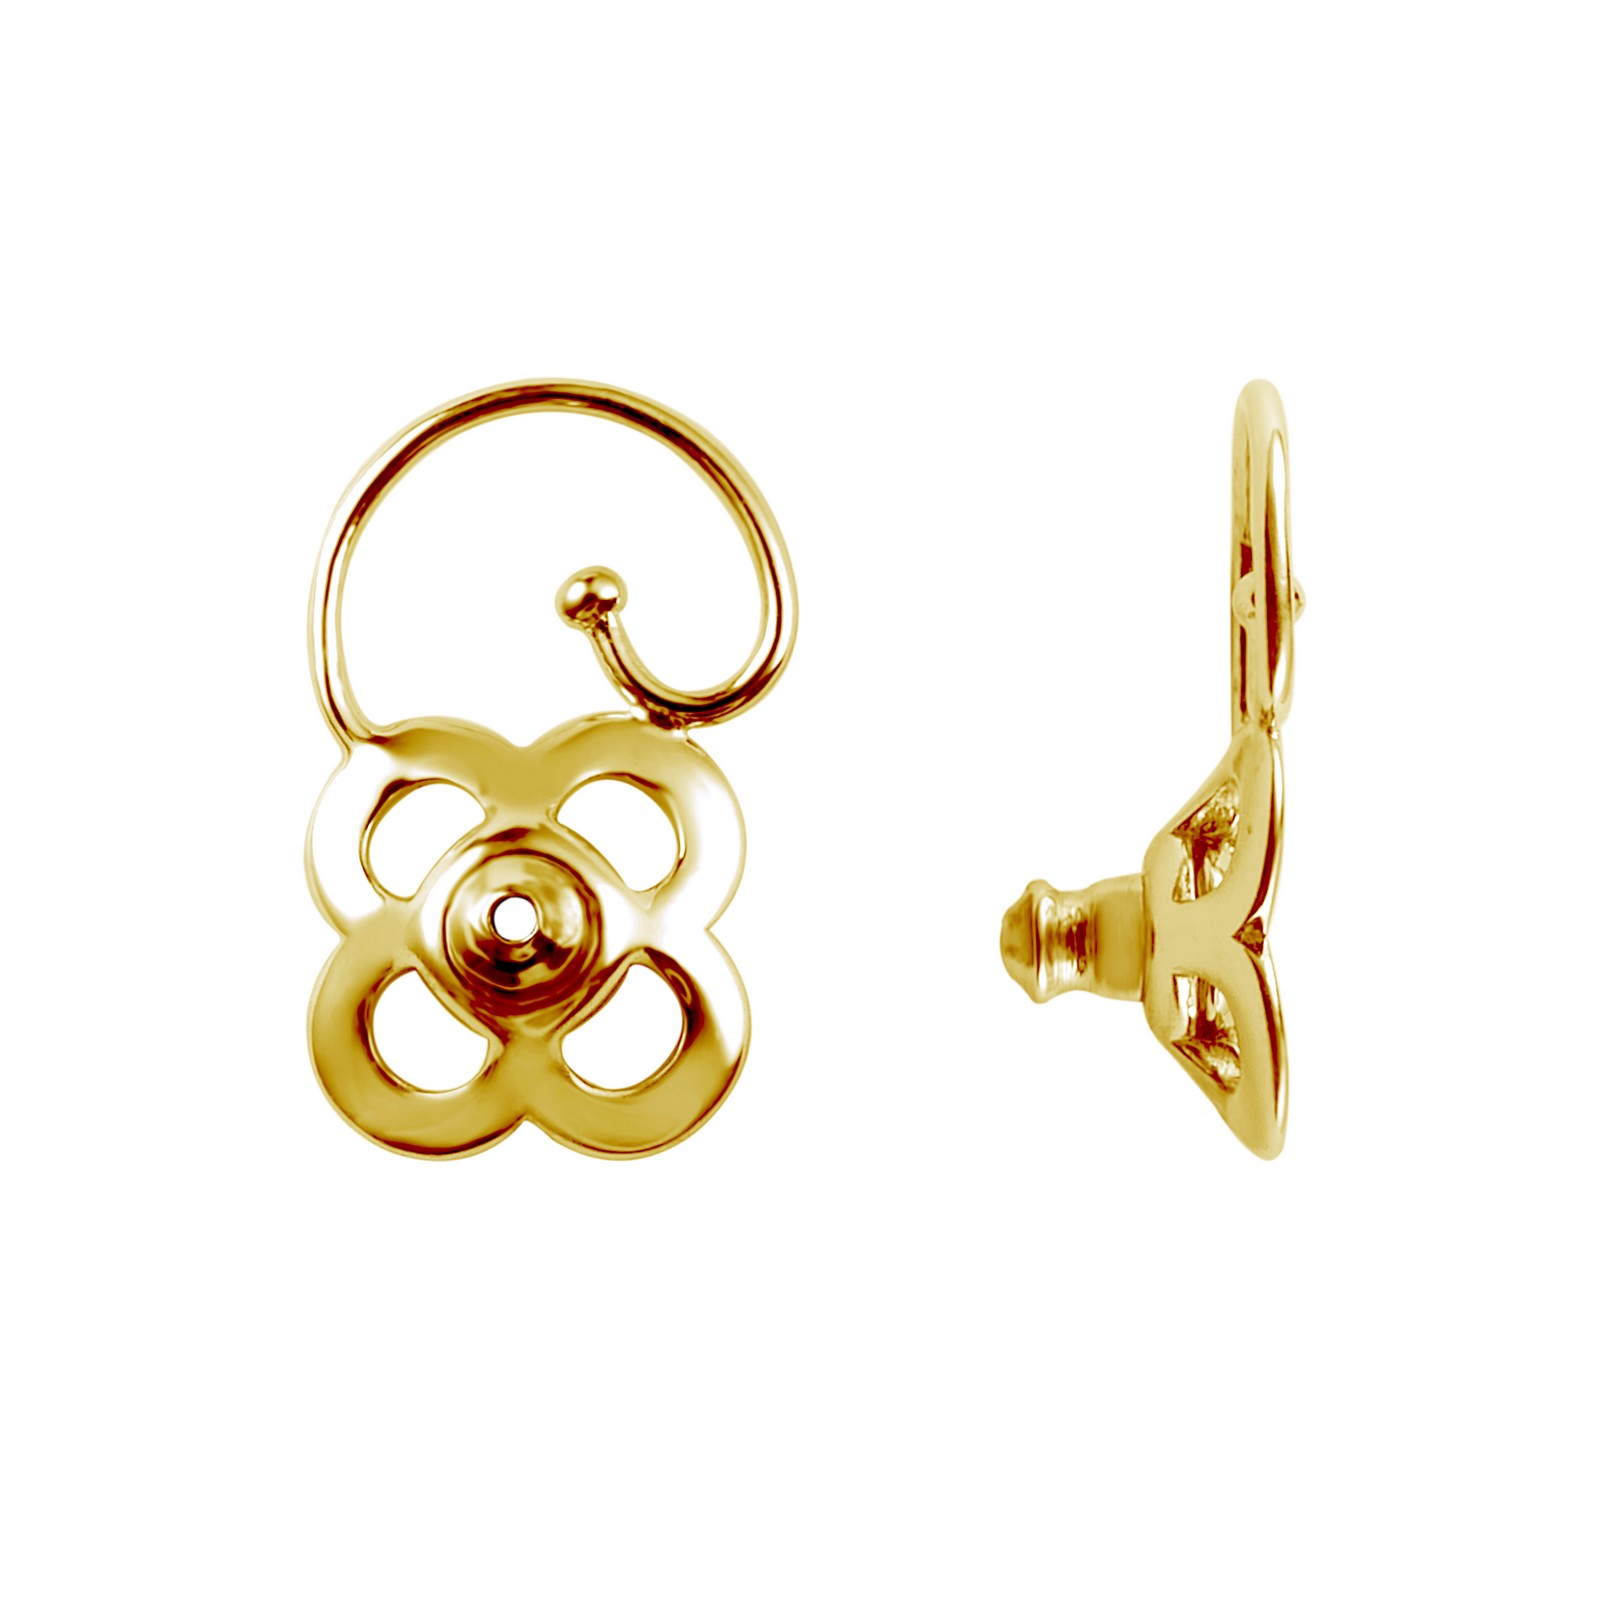 Lux-Clover Earring Backing J. Anthony Jewelers Neenah, WI